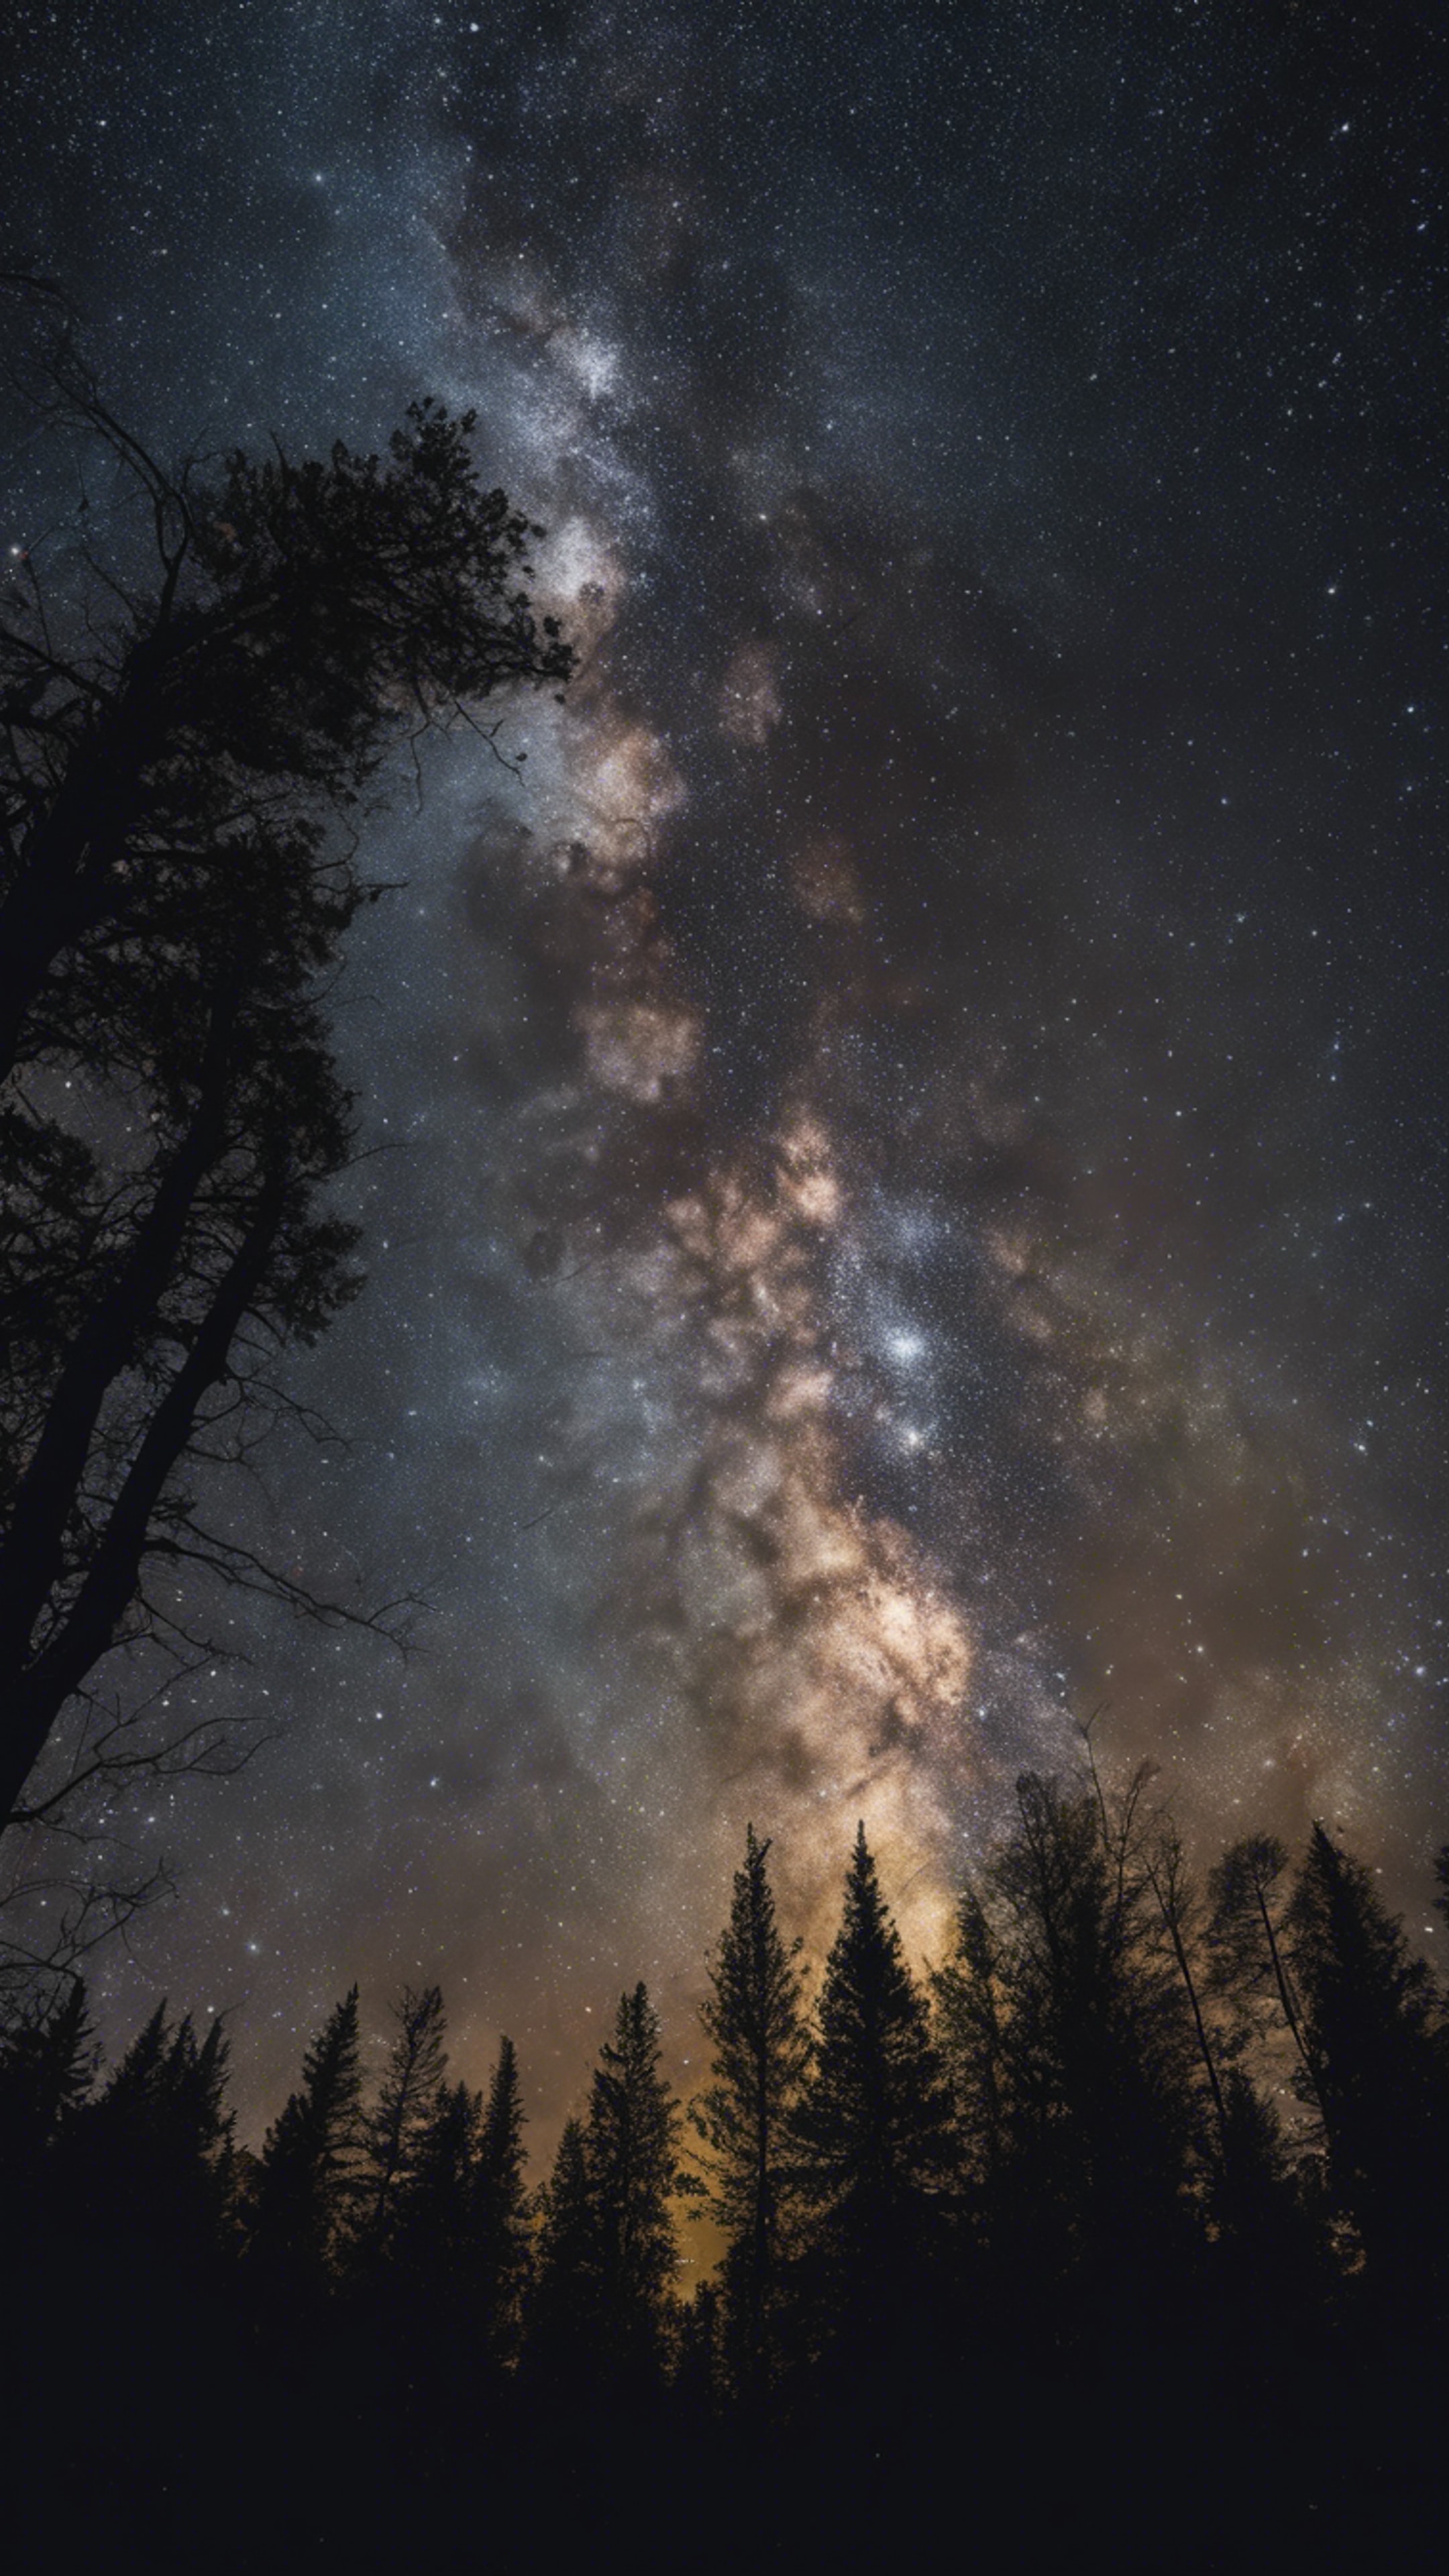 An astrophotograph showcasing the radiant Milky Way, against the contrast of a dark forest silhouette. Дэлгэцийн зураг[89bcc876a6704e52b700]